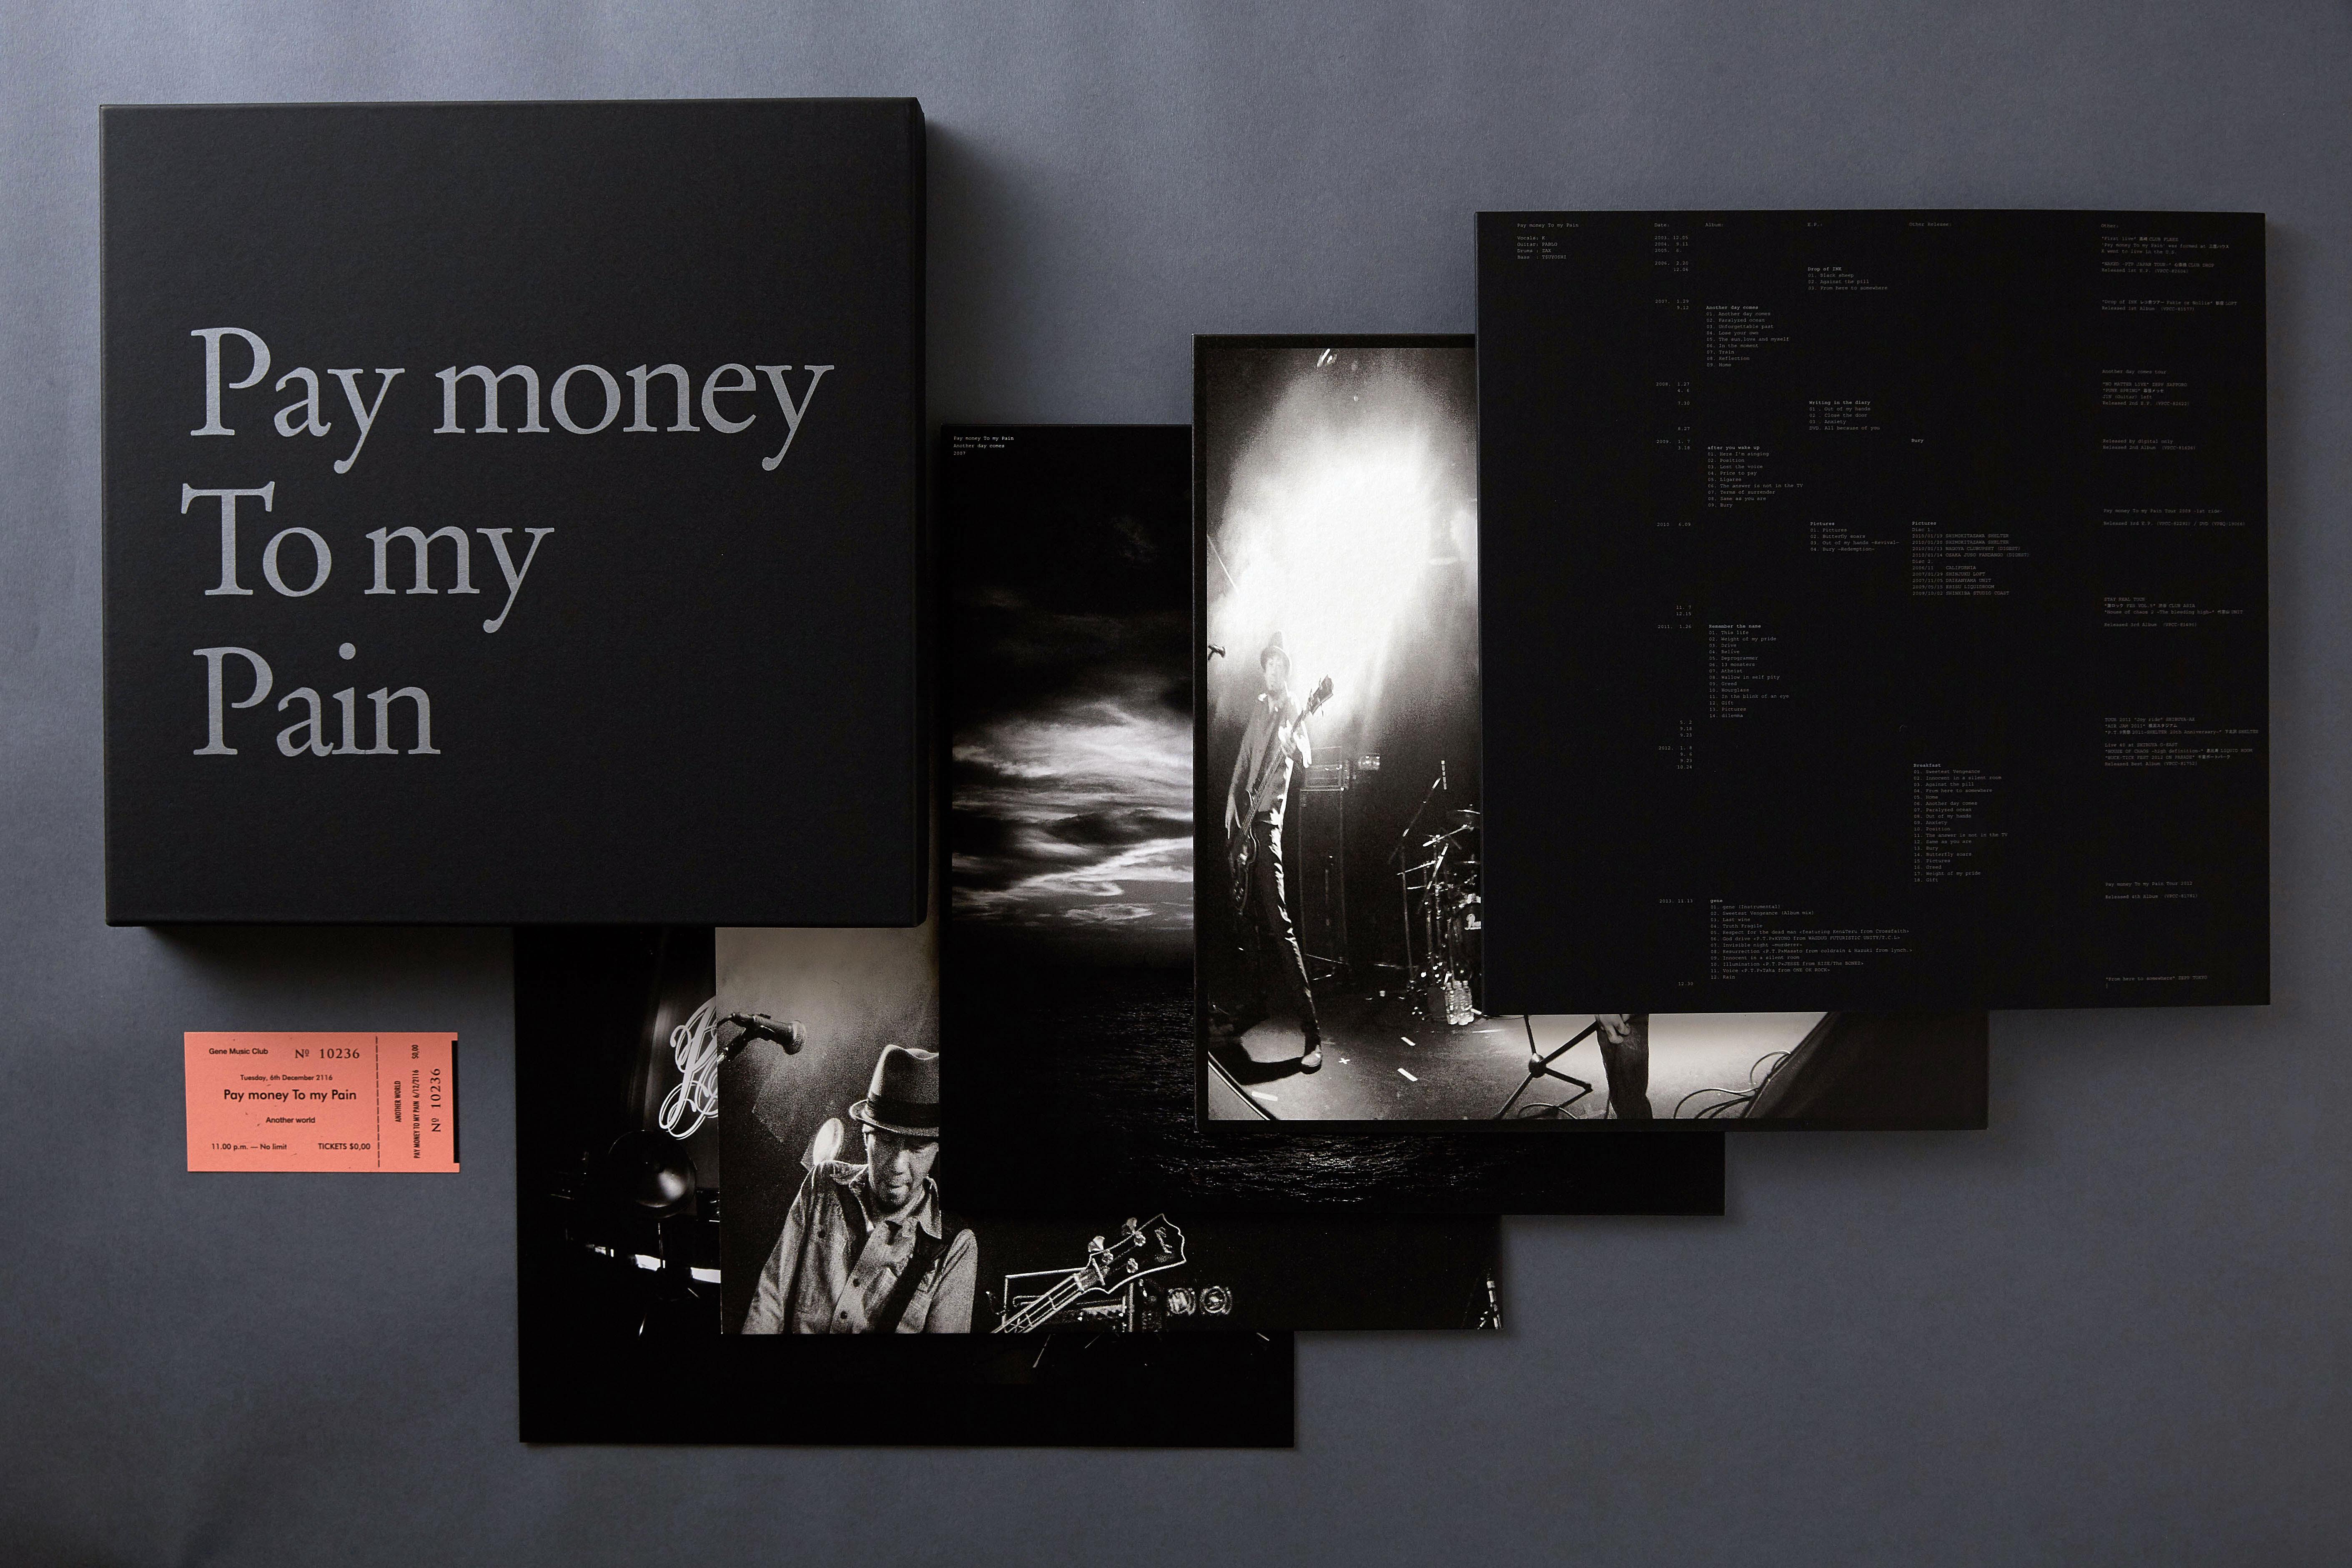 Pay money To my Pain: Complete Box Set (Box Set, 72-page booklet 